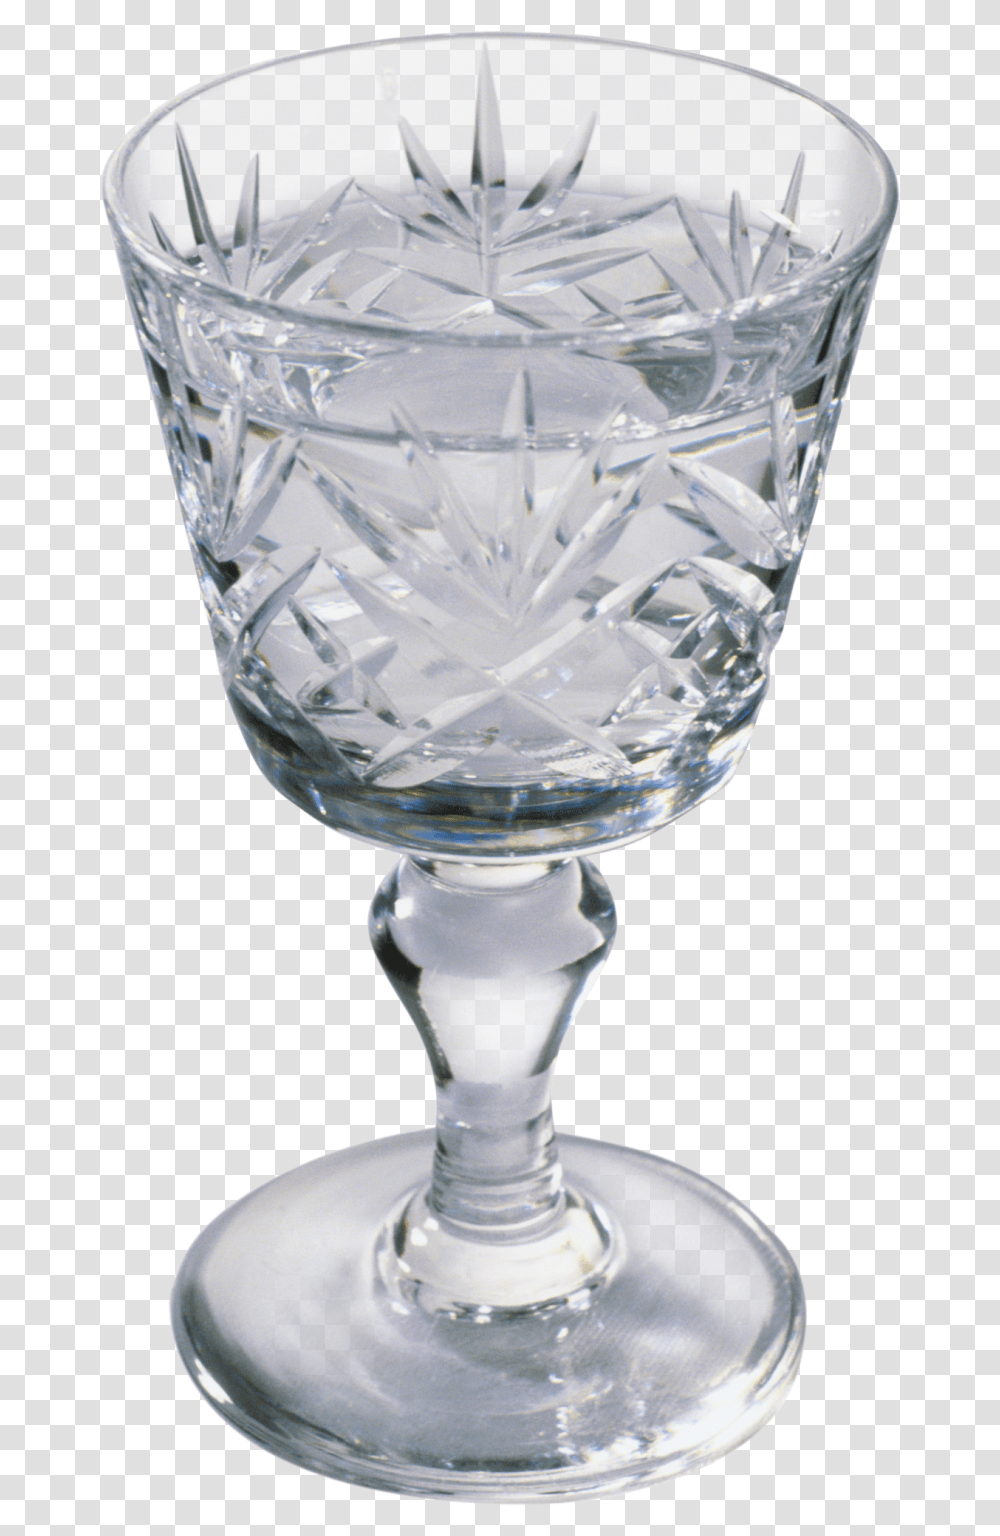 Wine Glass Image History Of Glass, Goblet, Lamp, Crystal, Alcohol Transparent Png